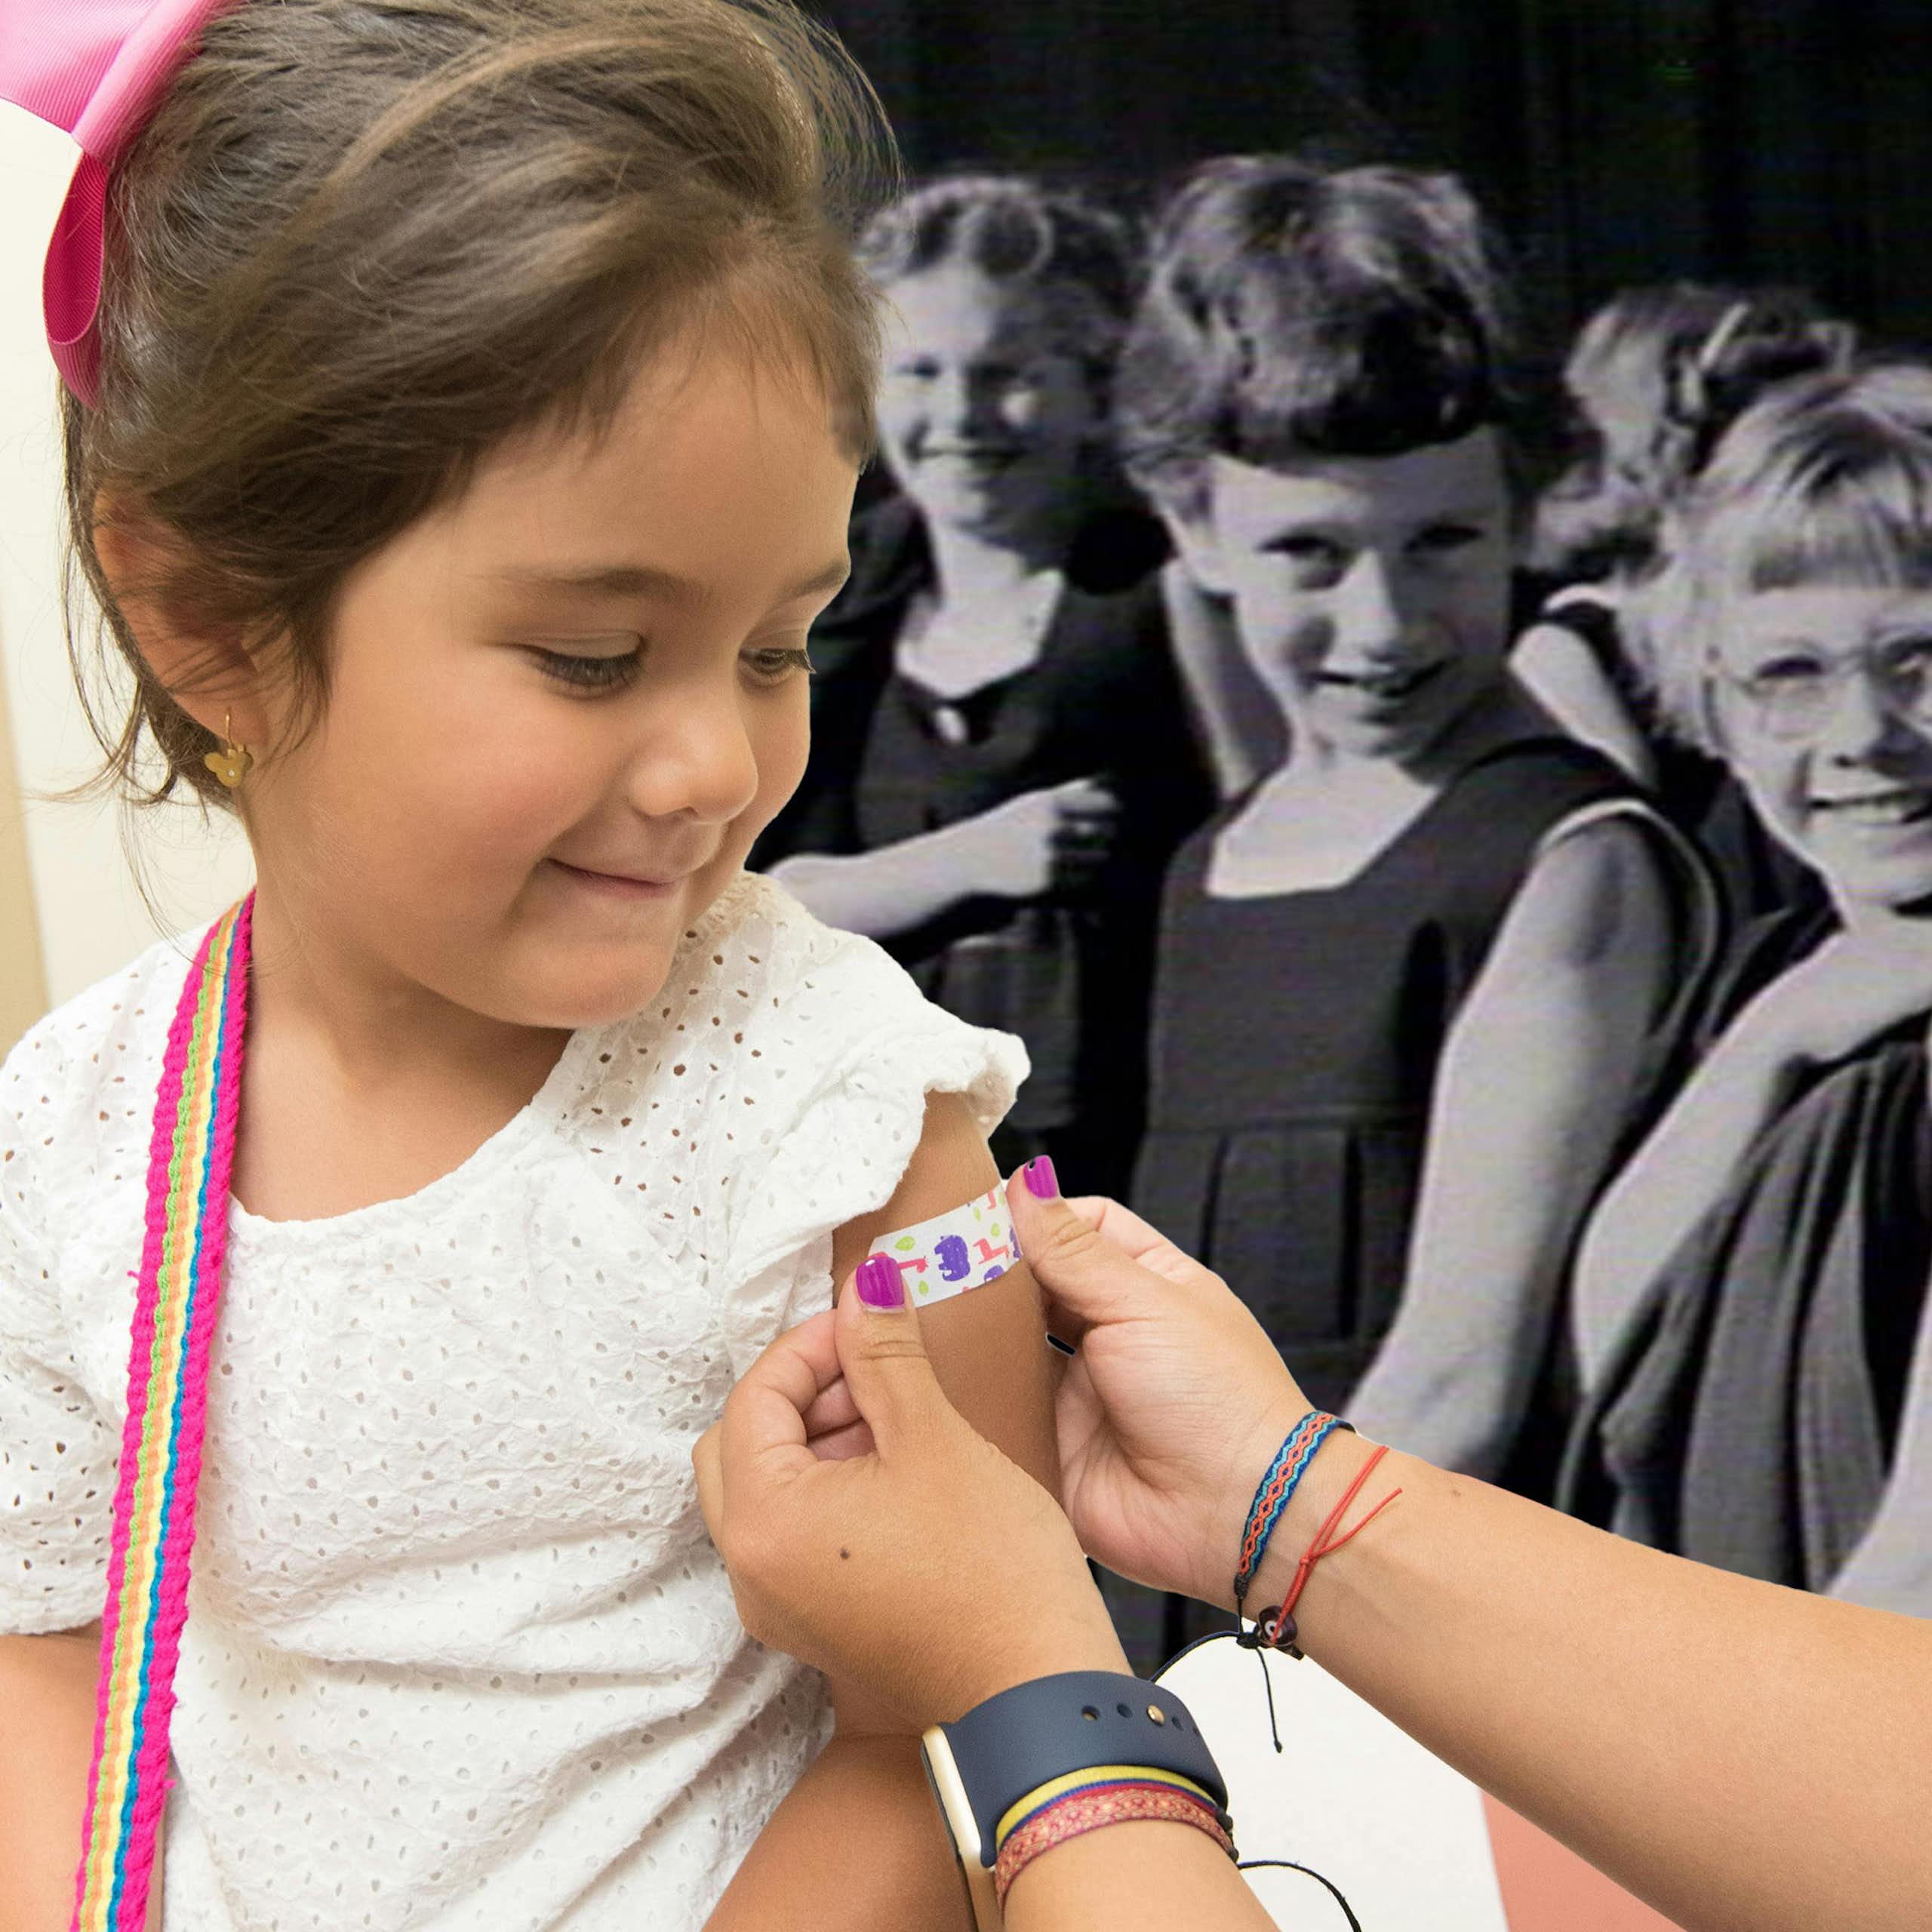 Girl getting vaccinated on left, with a group of girls showing their arms from the anti-polio vaccination at Randwick Girls School